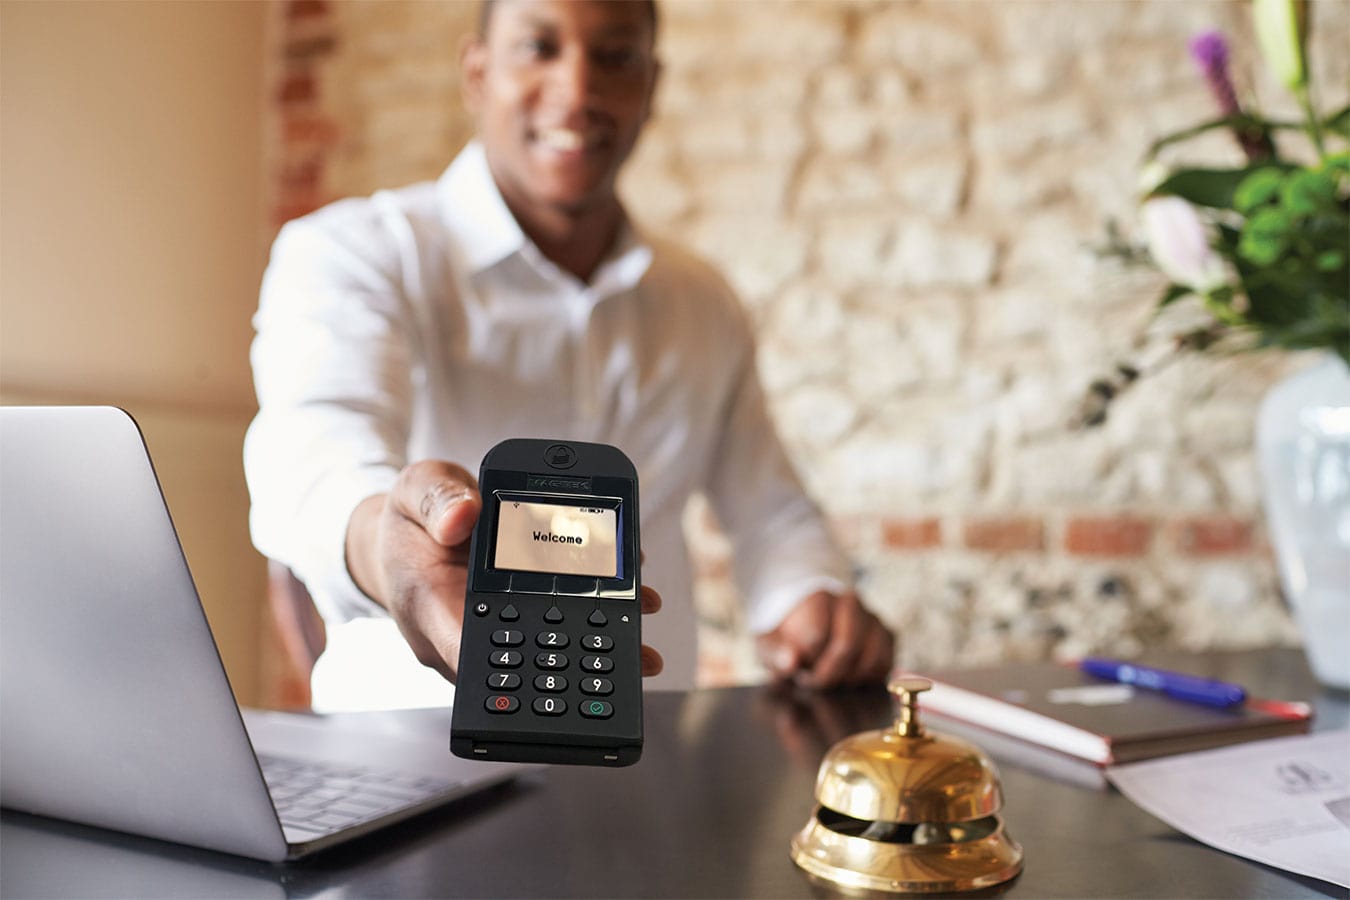 Hotel concierge and lobbies use the DynaPro Go card reader with PIN Pad for lodging payments